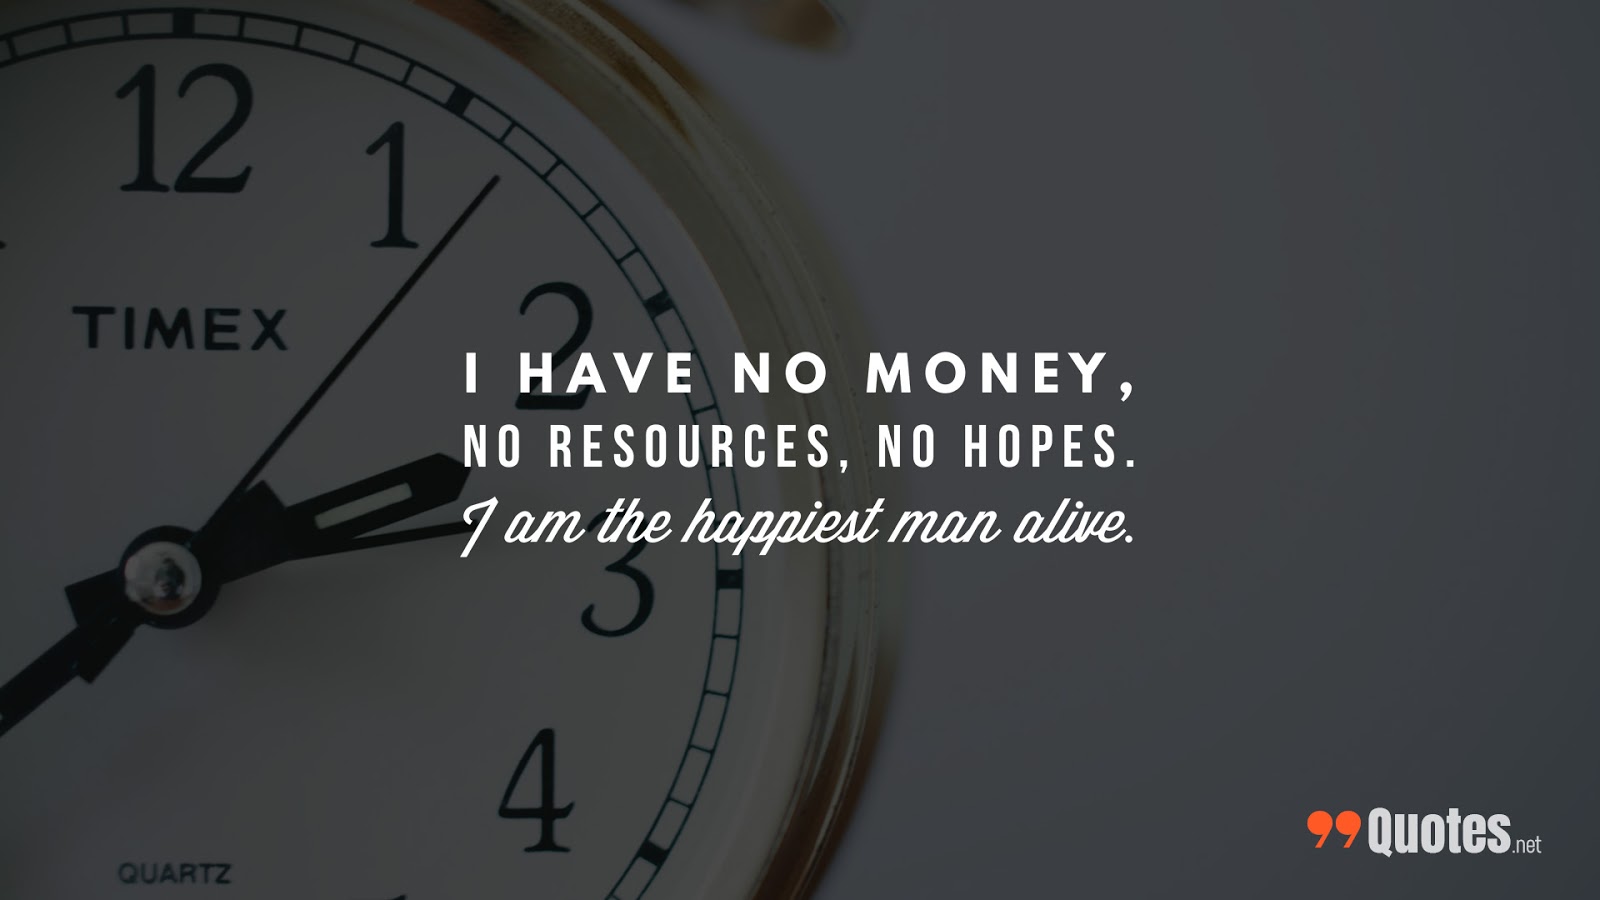 99 Money Quotes & Advises Wallpapers Every Wise Man Should Learn